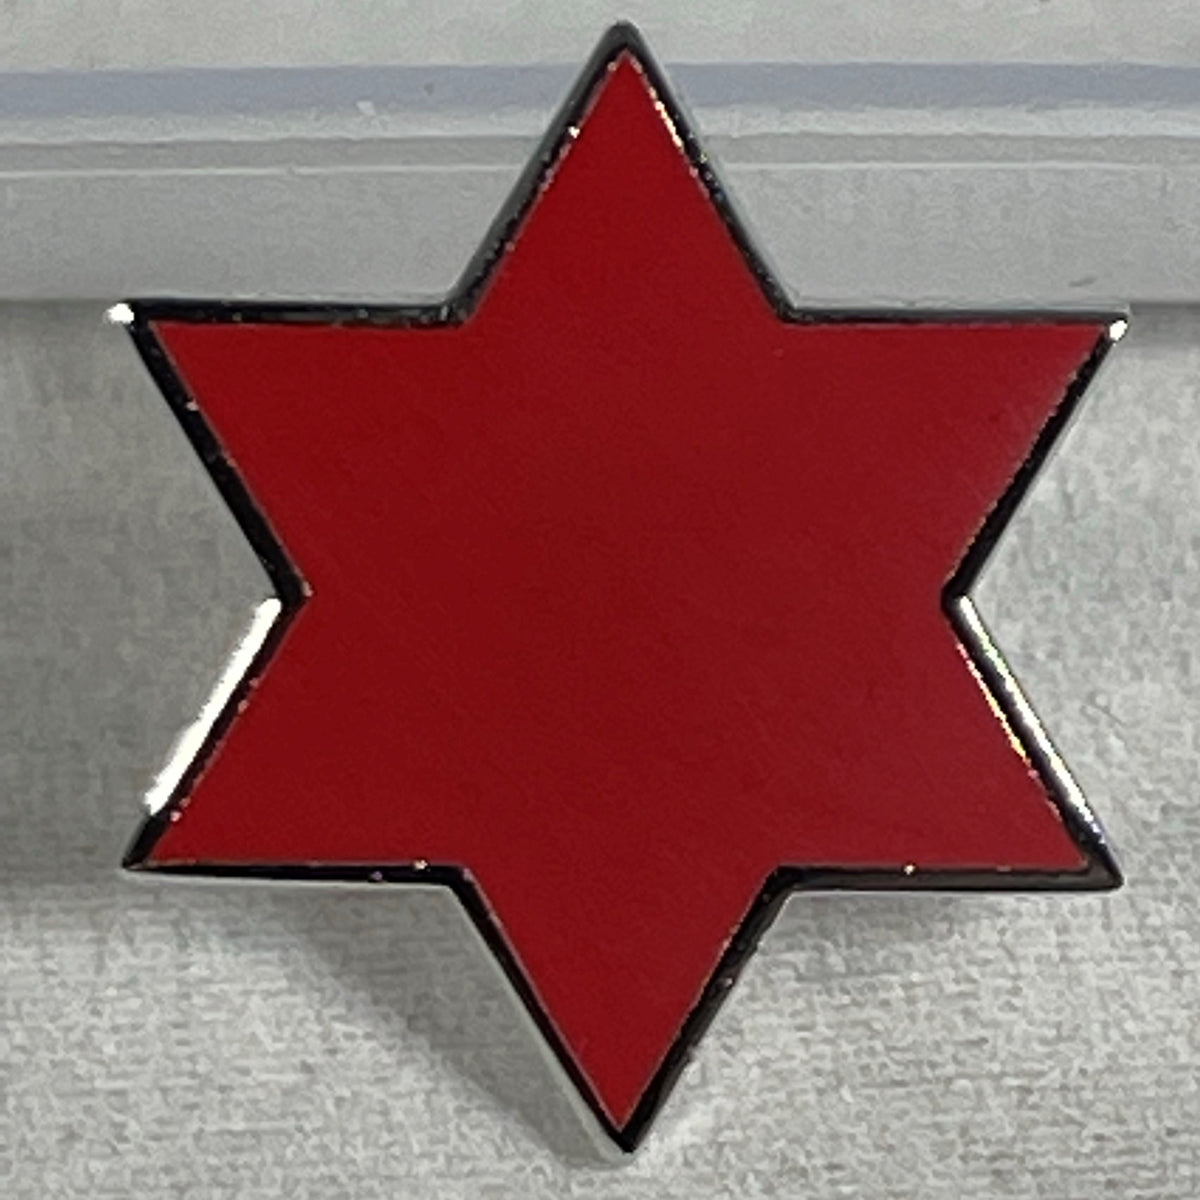 6th Infantry Division Pin